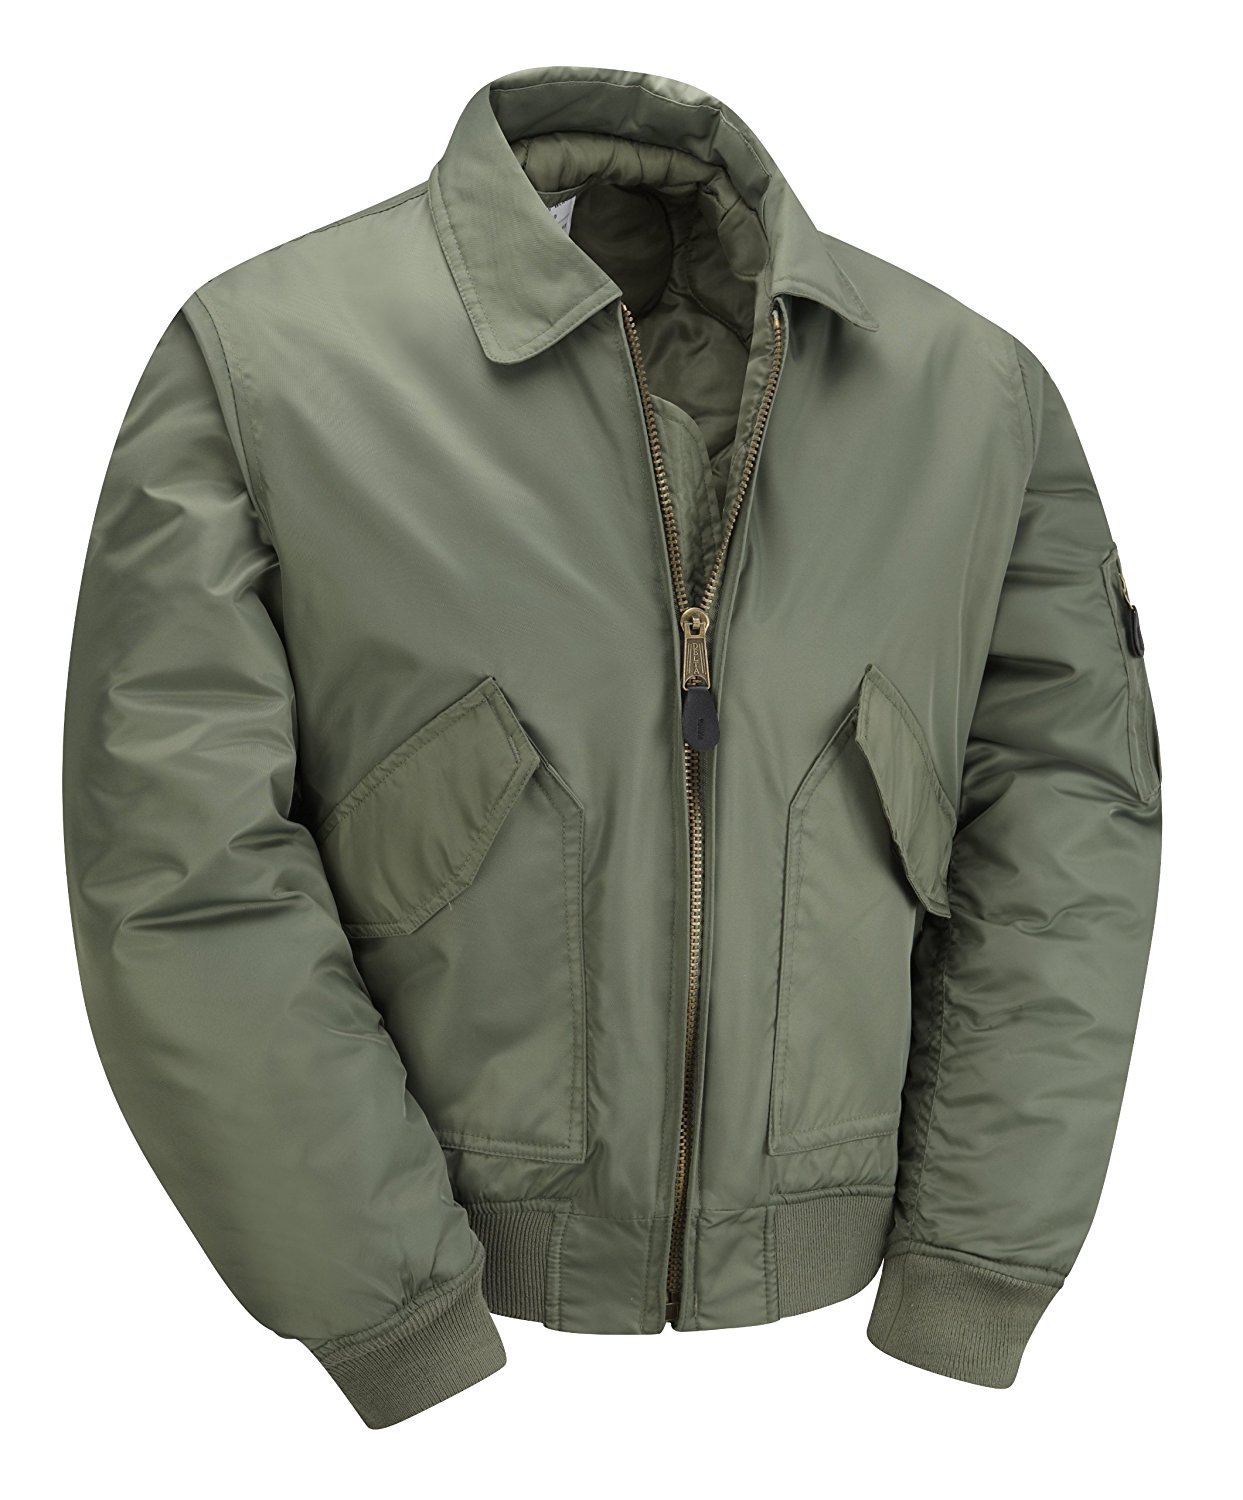 Bomber and Flight Jacket Guide